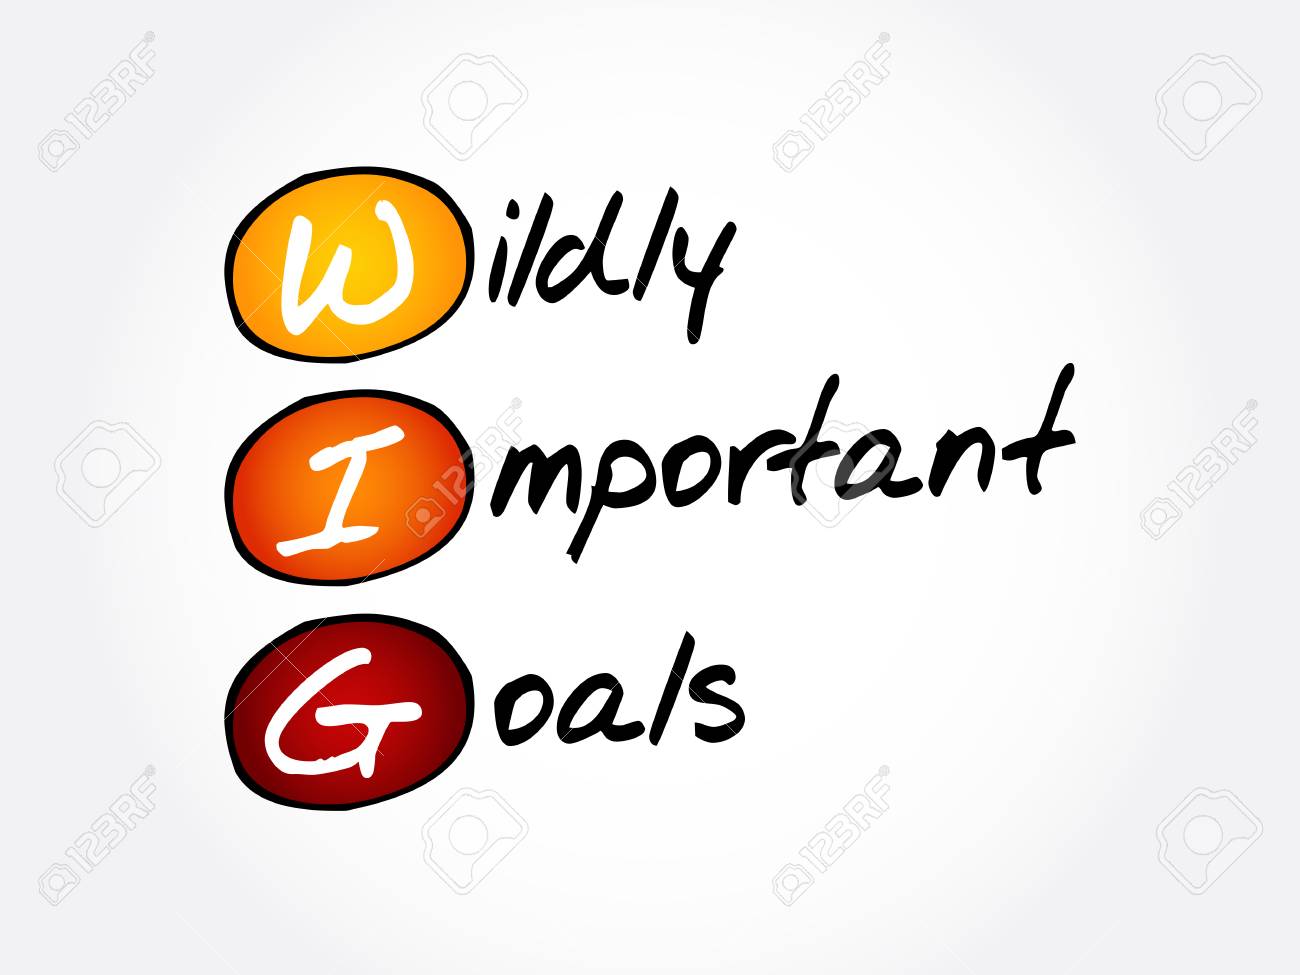 Wig Wildly Important Goals Acronym Business Concept Background